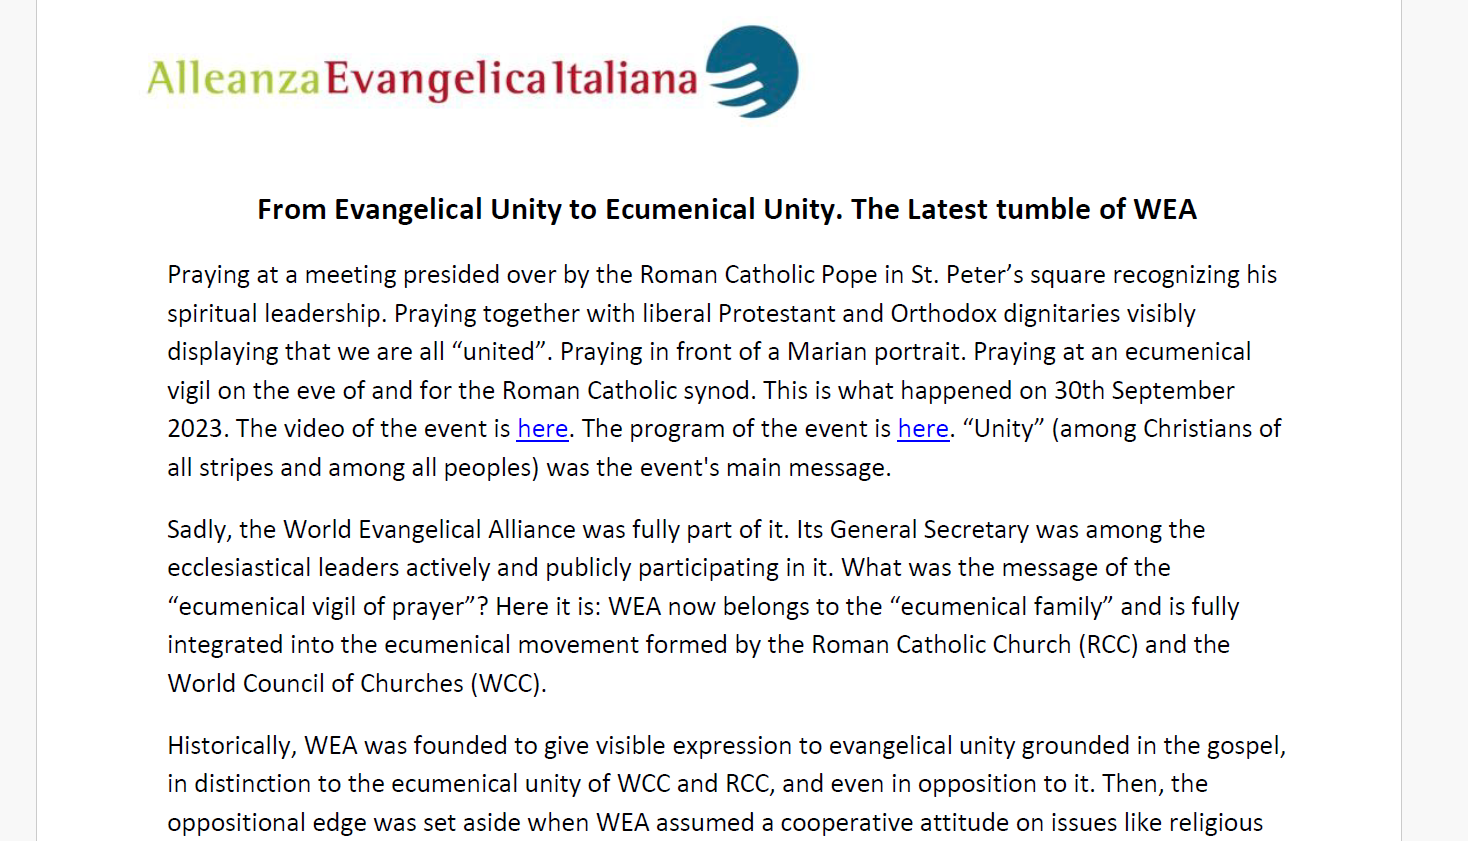 Italian evangelicals “confused and disappointed” by WEA leader’s participation in Vatican ecumenical prayers before Roman Catholic synod